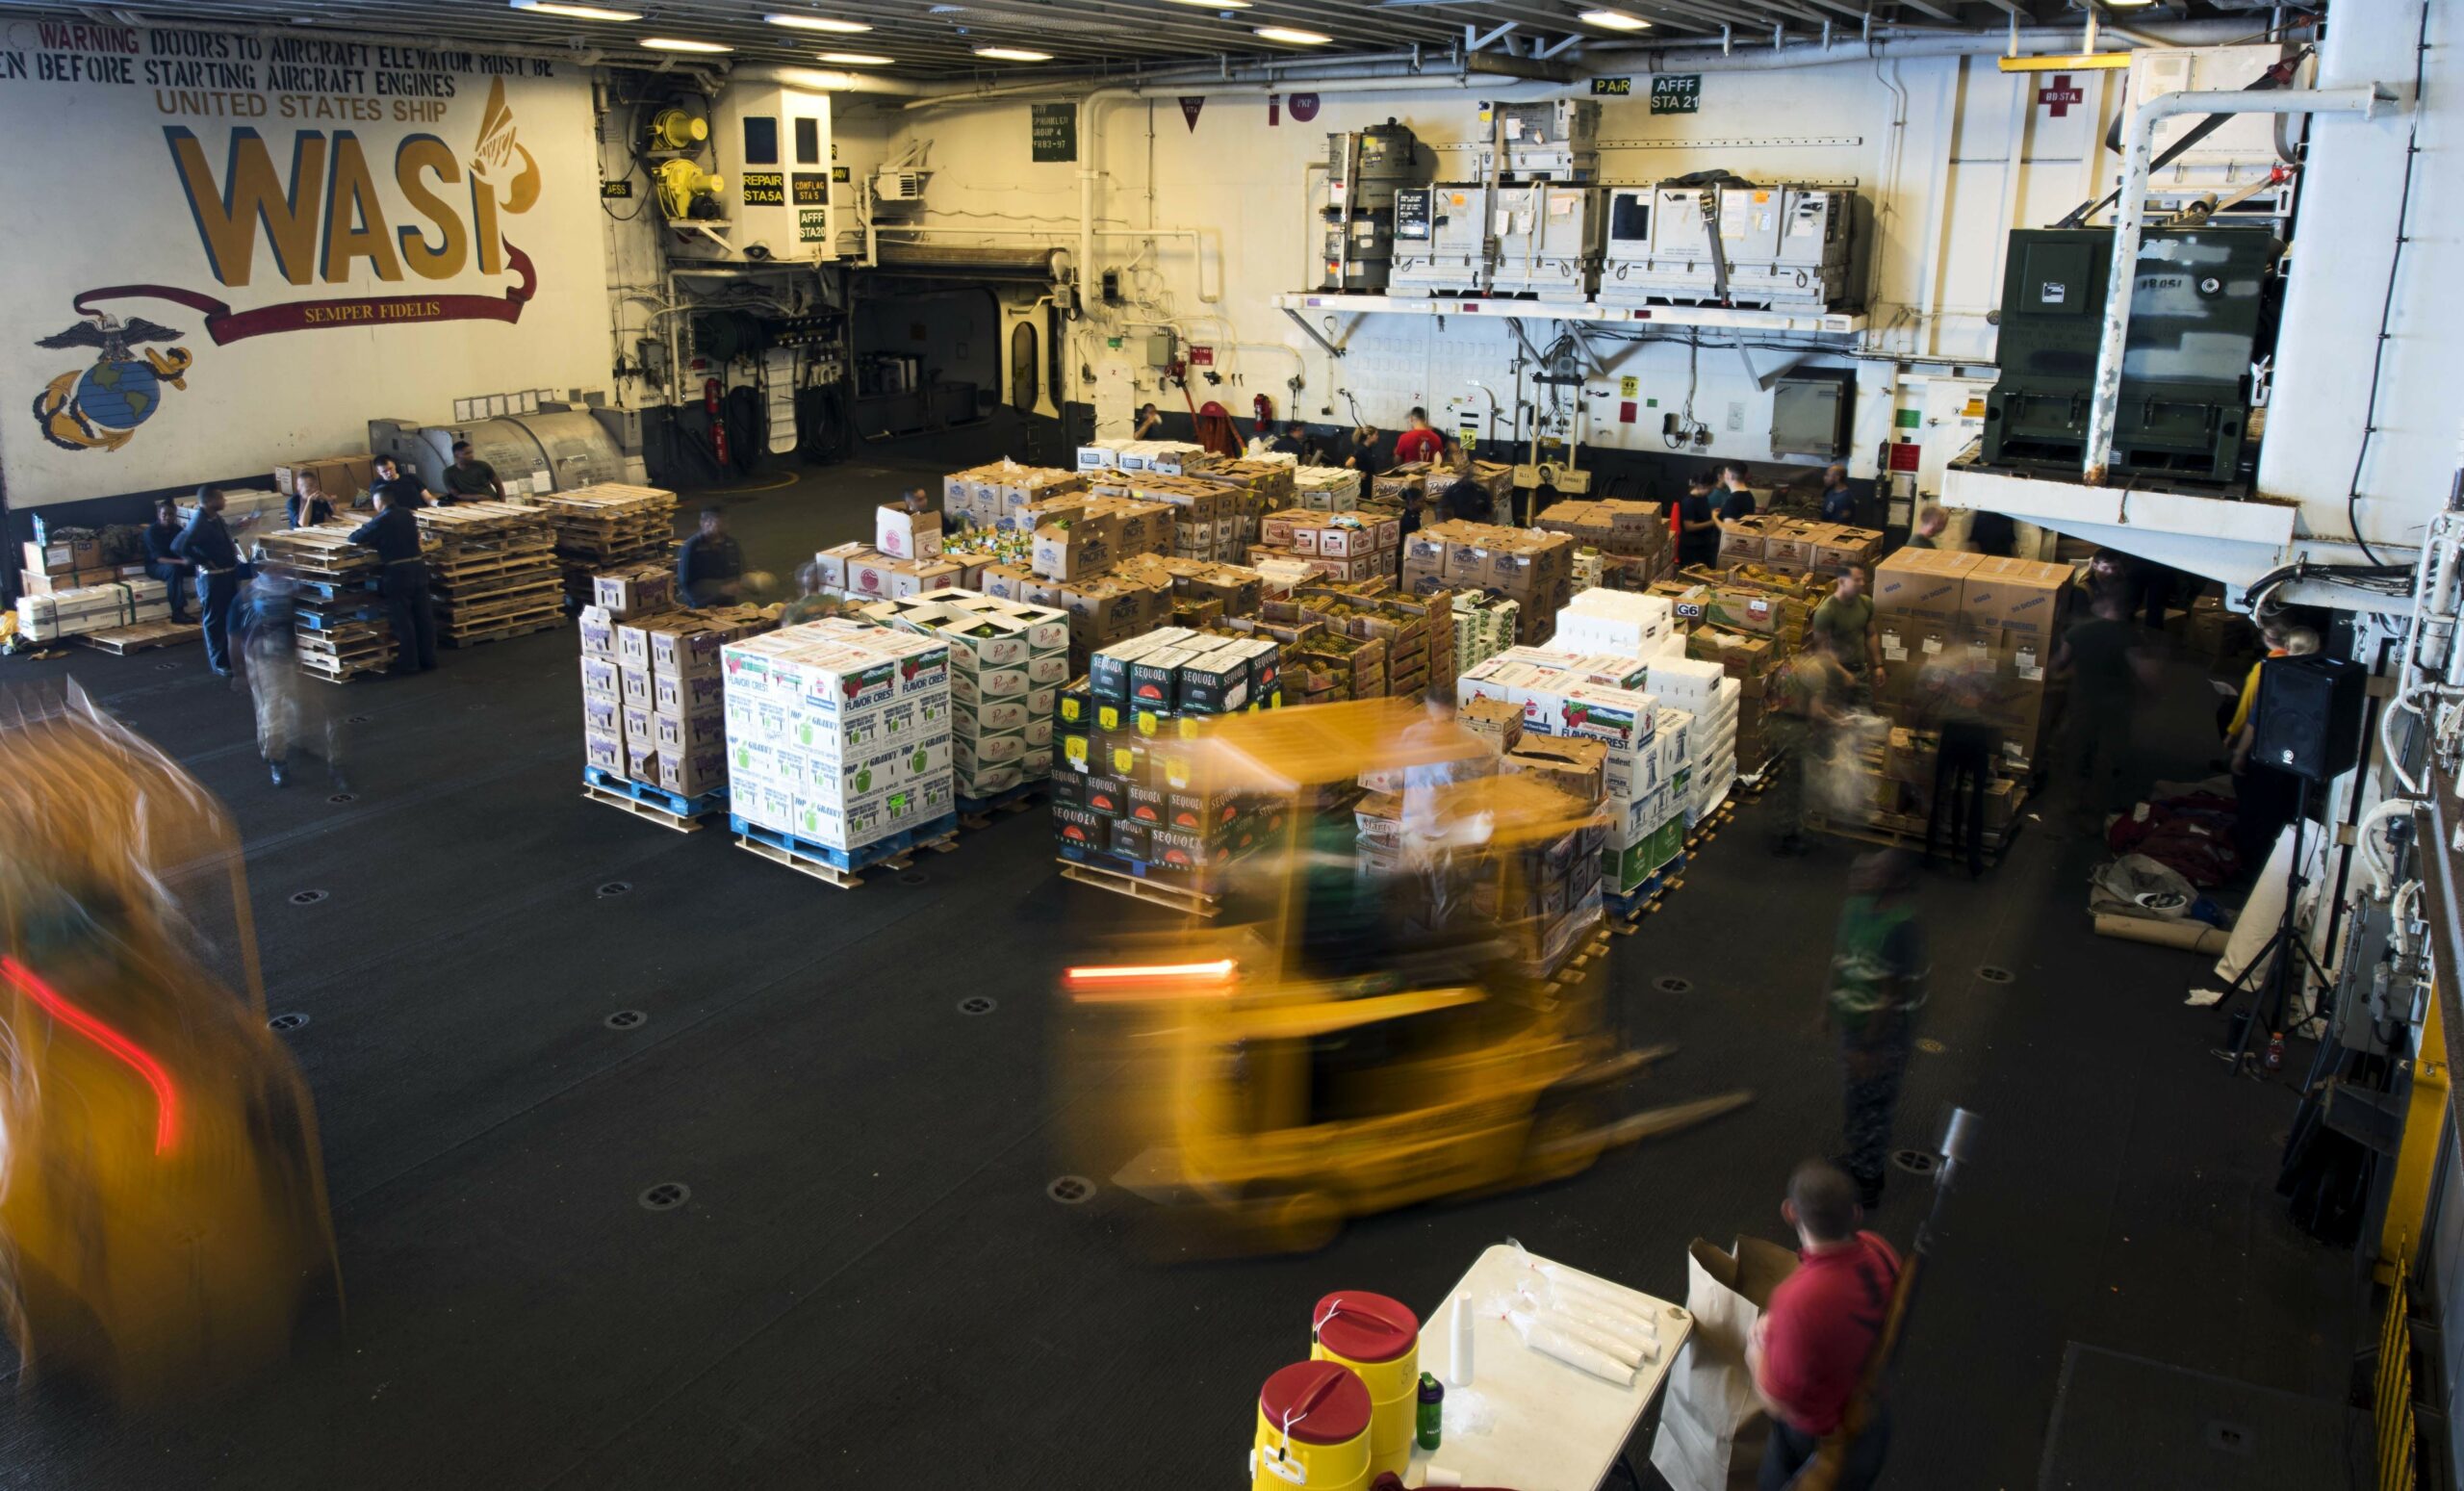 EAST CHINA SEA (Sept. 22, 2018) - Sailors aboard the amphibious assault ship USS Wasp (LHD 1) use forklifts to move food and supplies during a replenishment at sea with the dry cargo and ammunition ship USNS Washington Chambers (T-AKE). Wasp, flagship of the Wasp Amphibious Ready Group, with embarked 31st Marine Expeditionary Unit, is operating in the Indo-Pacific region to enhance interoperability with partners and serve as a ready-response force for any type of contingency. (U.S. Navy photo by Mass Communication Specialist 2nd Class Michael Molina)